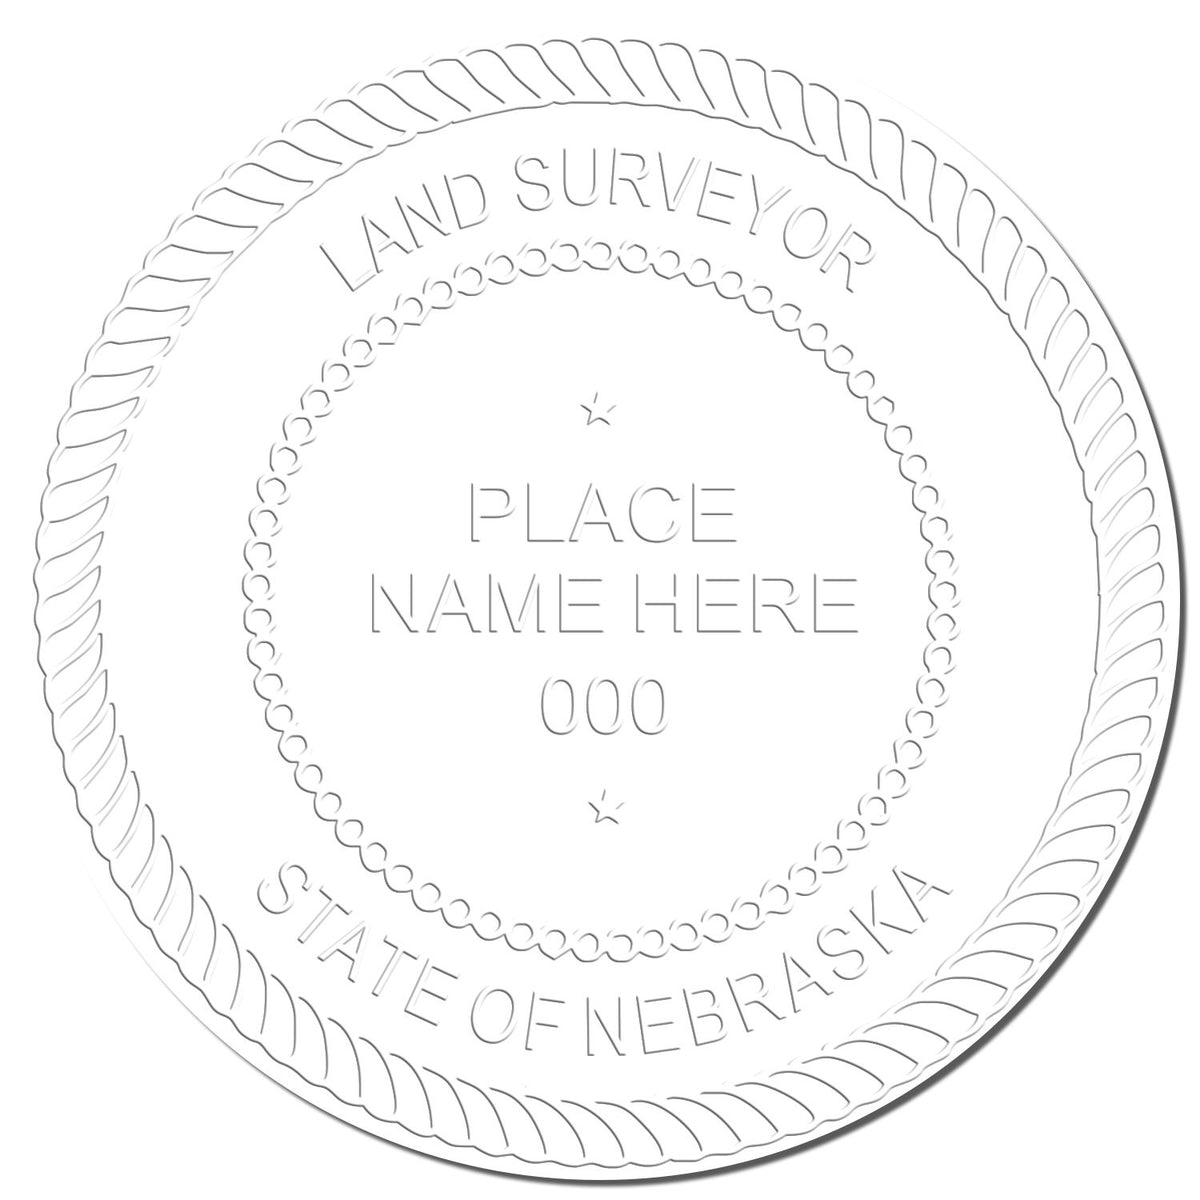 This paper is stamped with a sample imprint of the Nebraska Desk Surveyor Seal Embosser, signifying its quality and reliability.